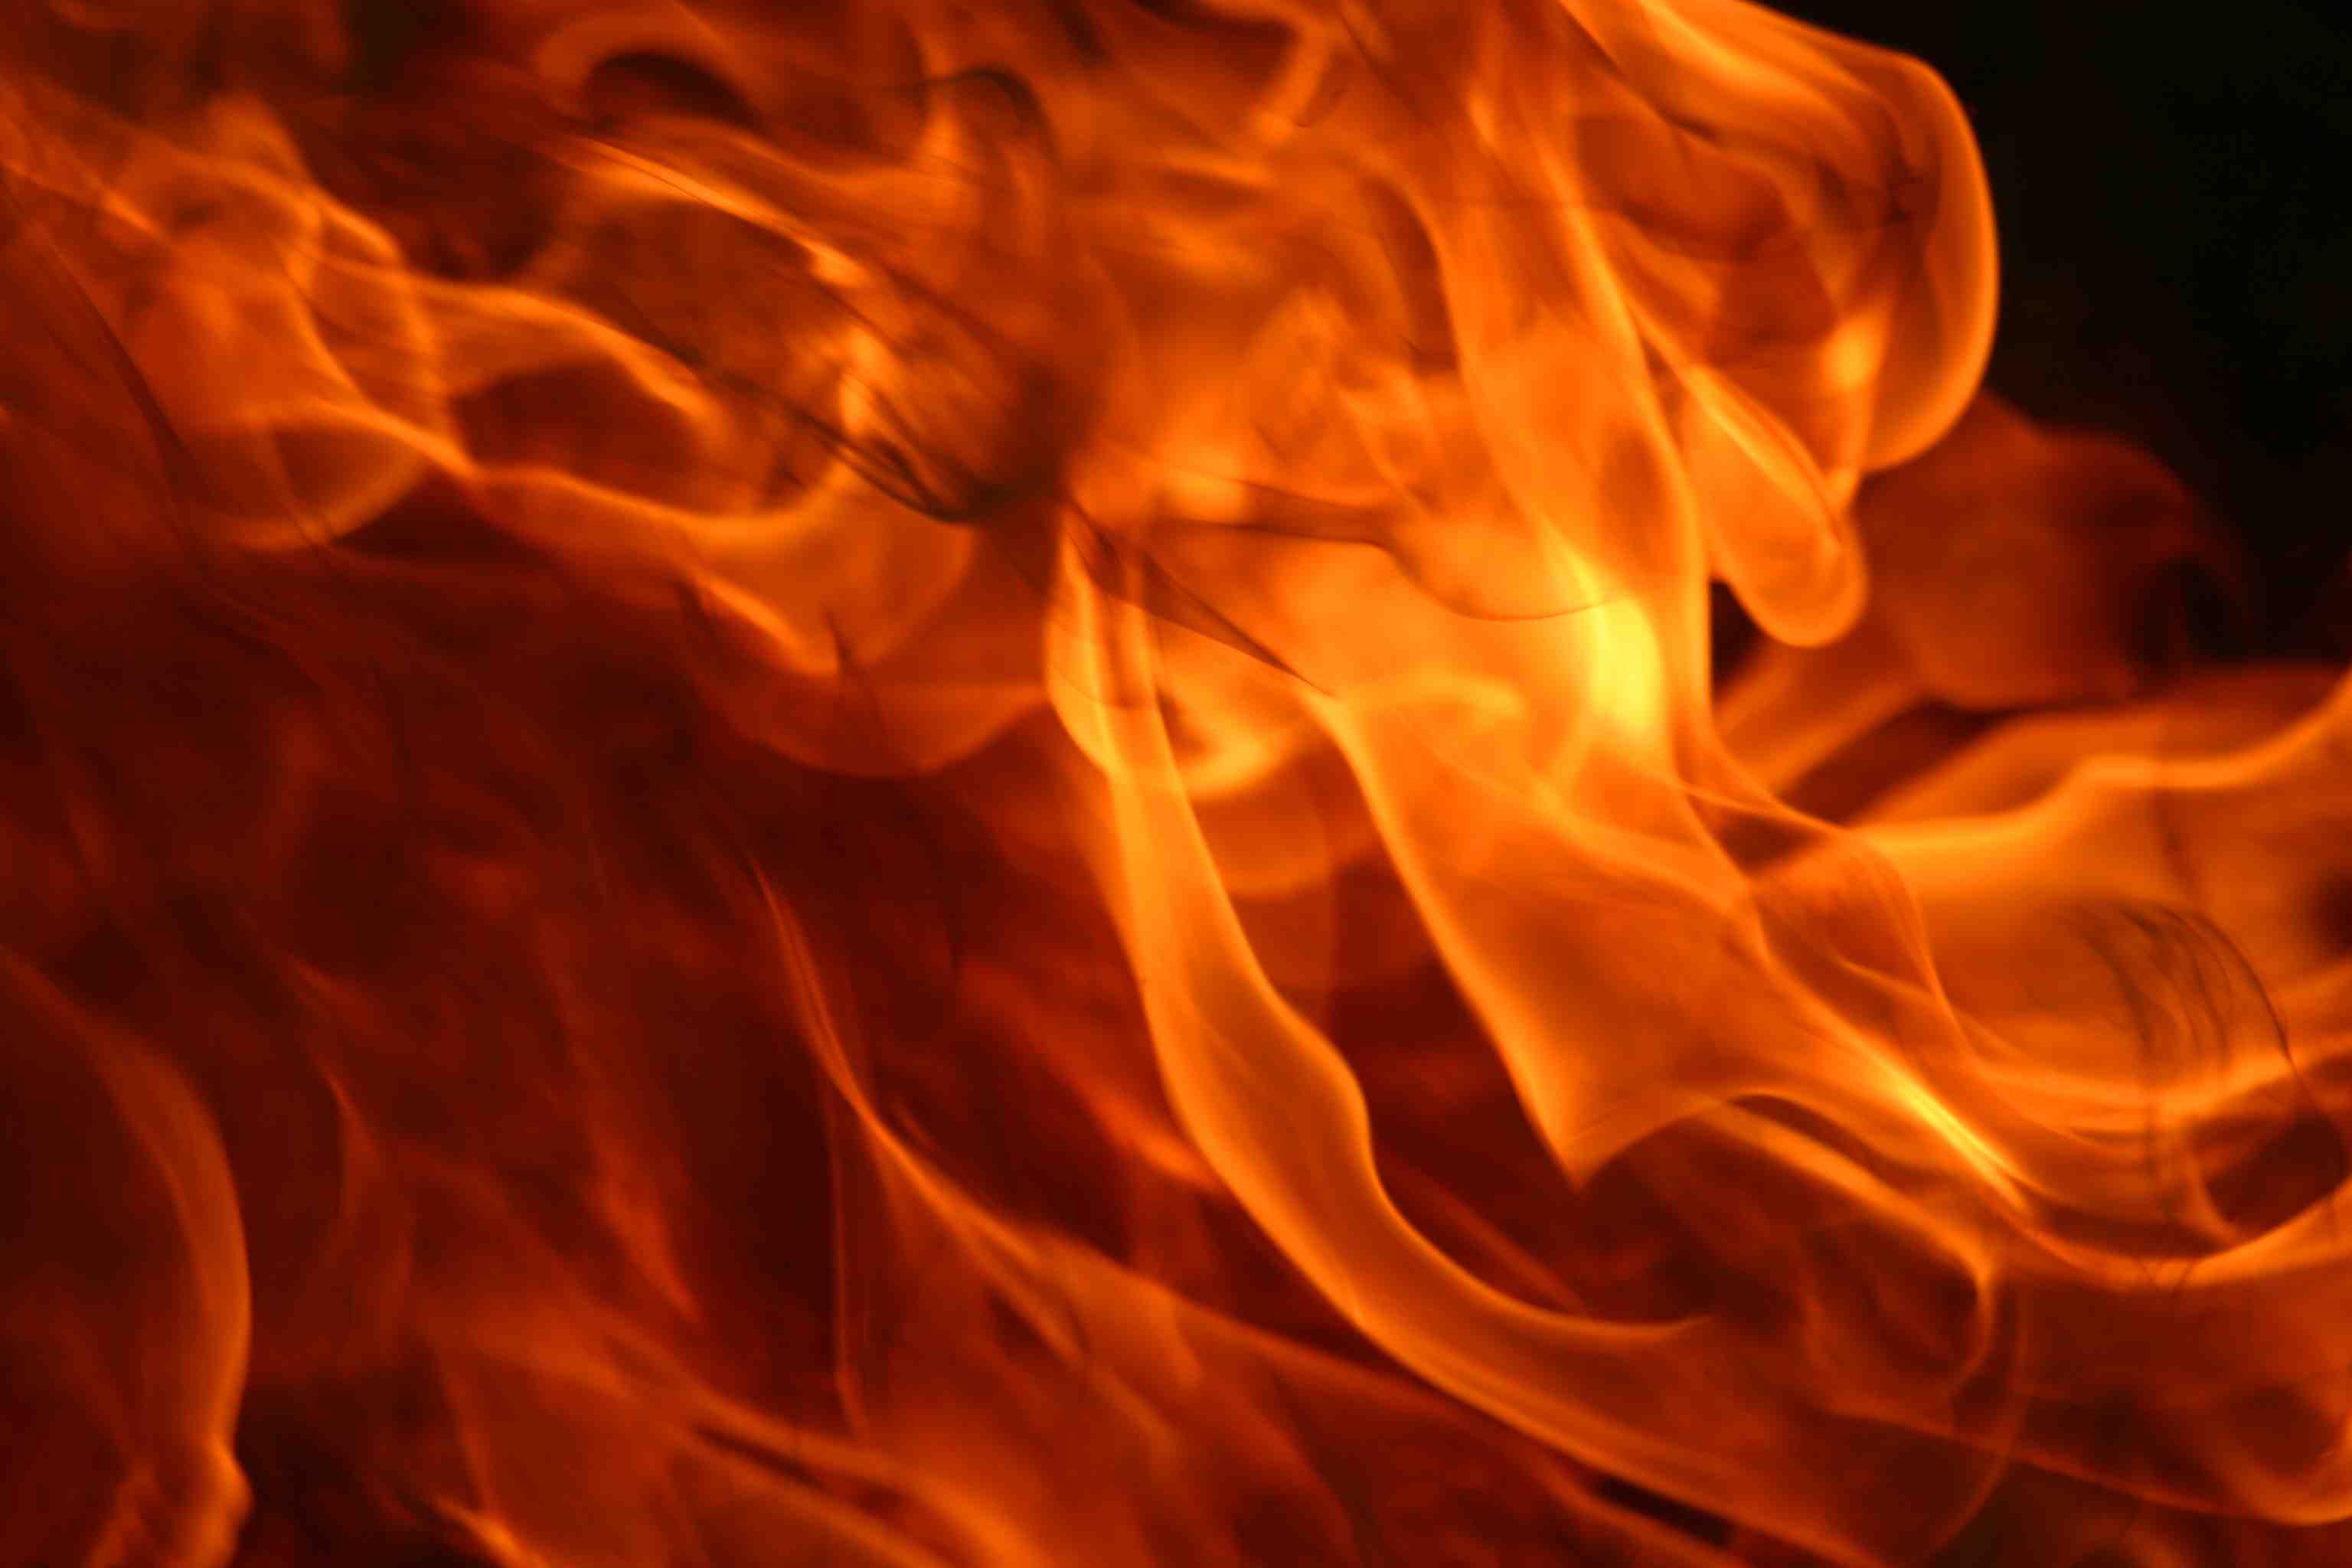 Feel free to download and set any of these stunning fire images as